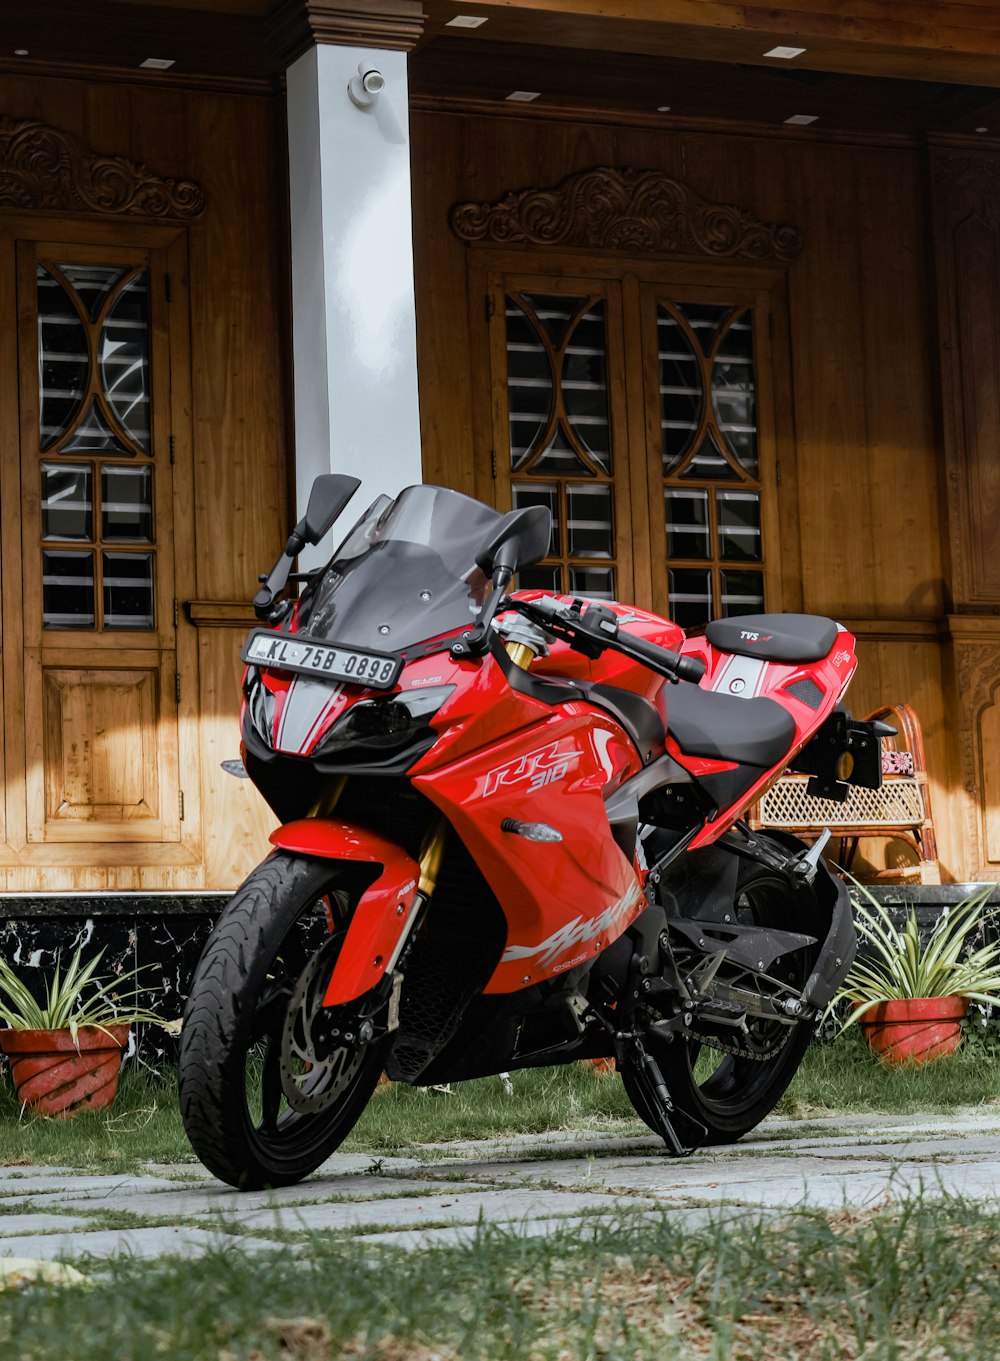 red and black sports bike parked beside brown wooden door